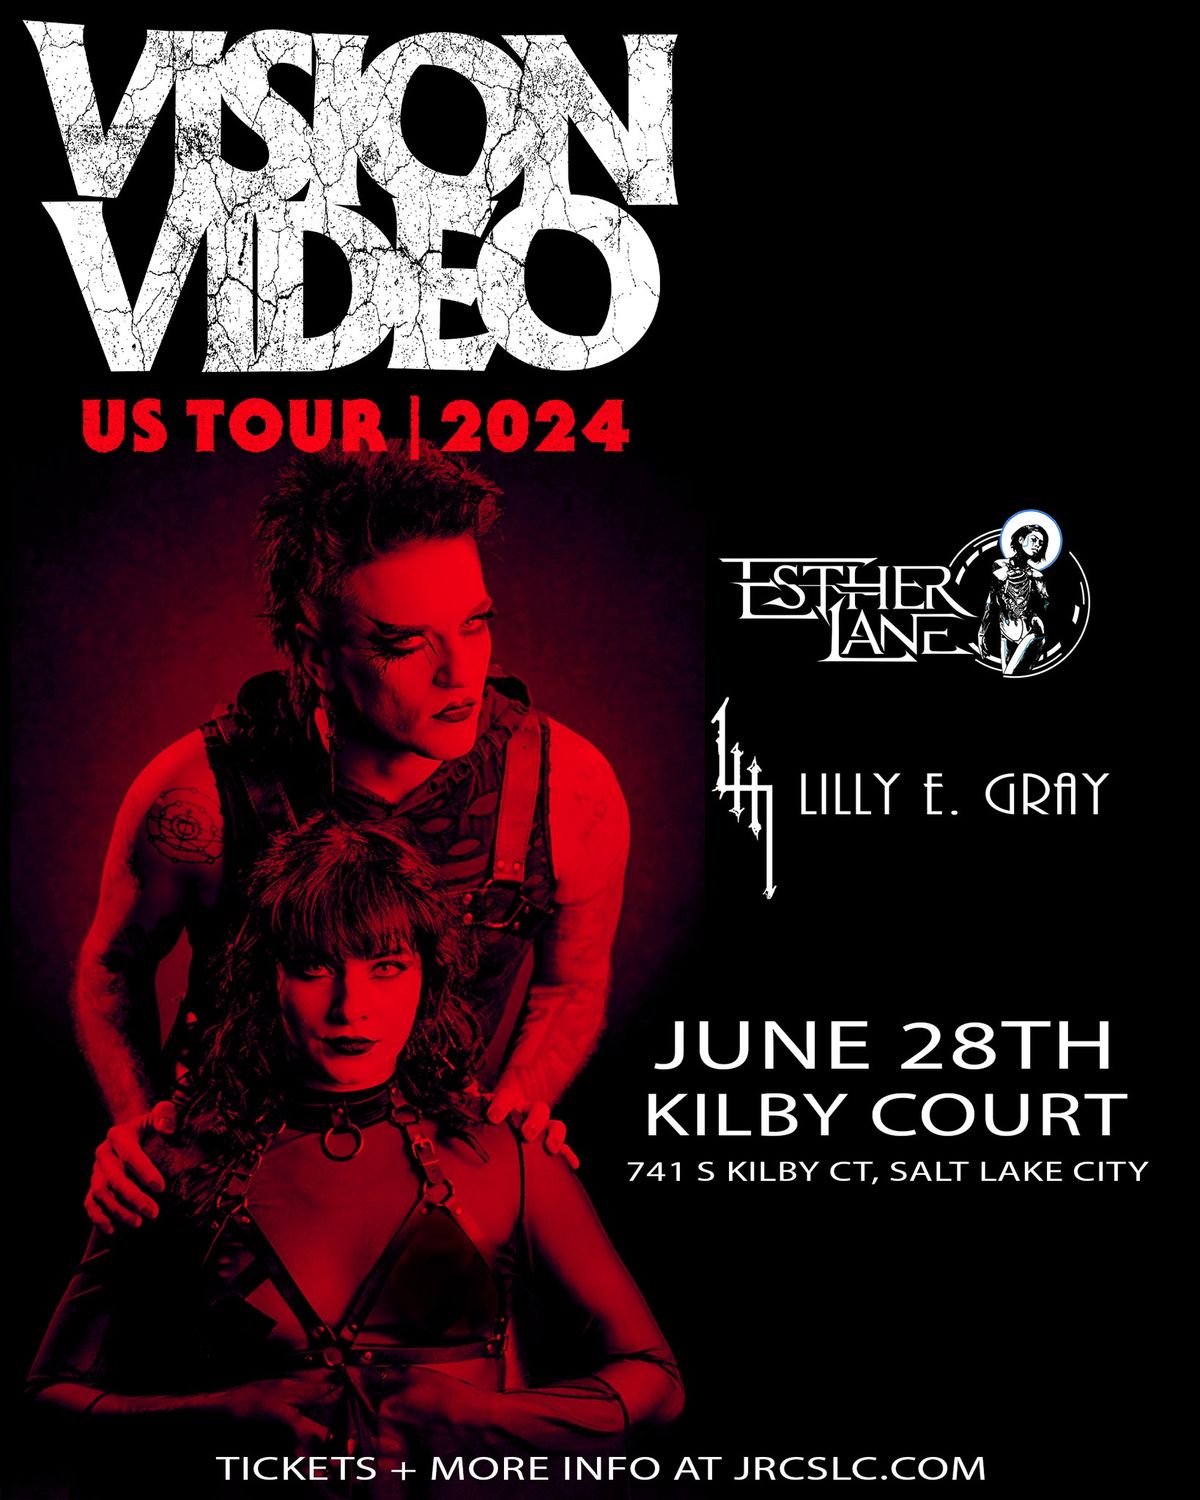 Vision Video, Esther Lane, Lilly E. Gray at Kilby Court